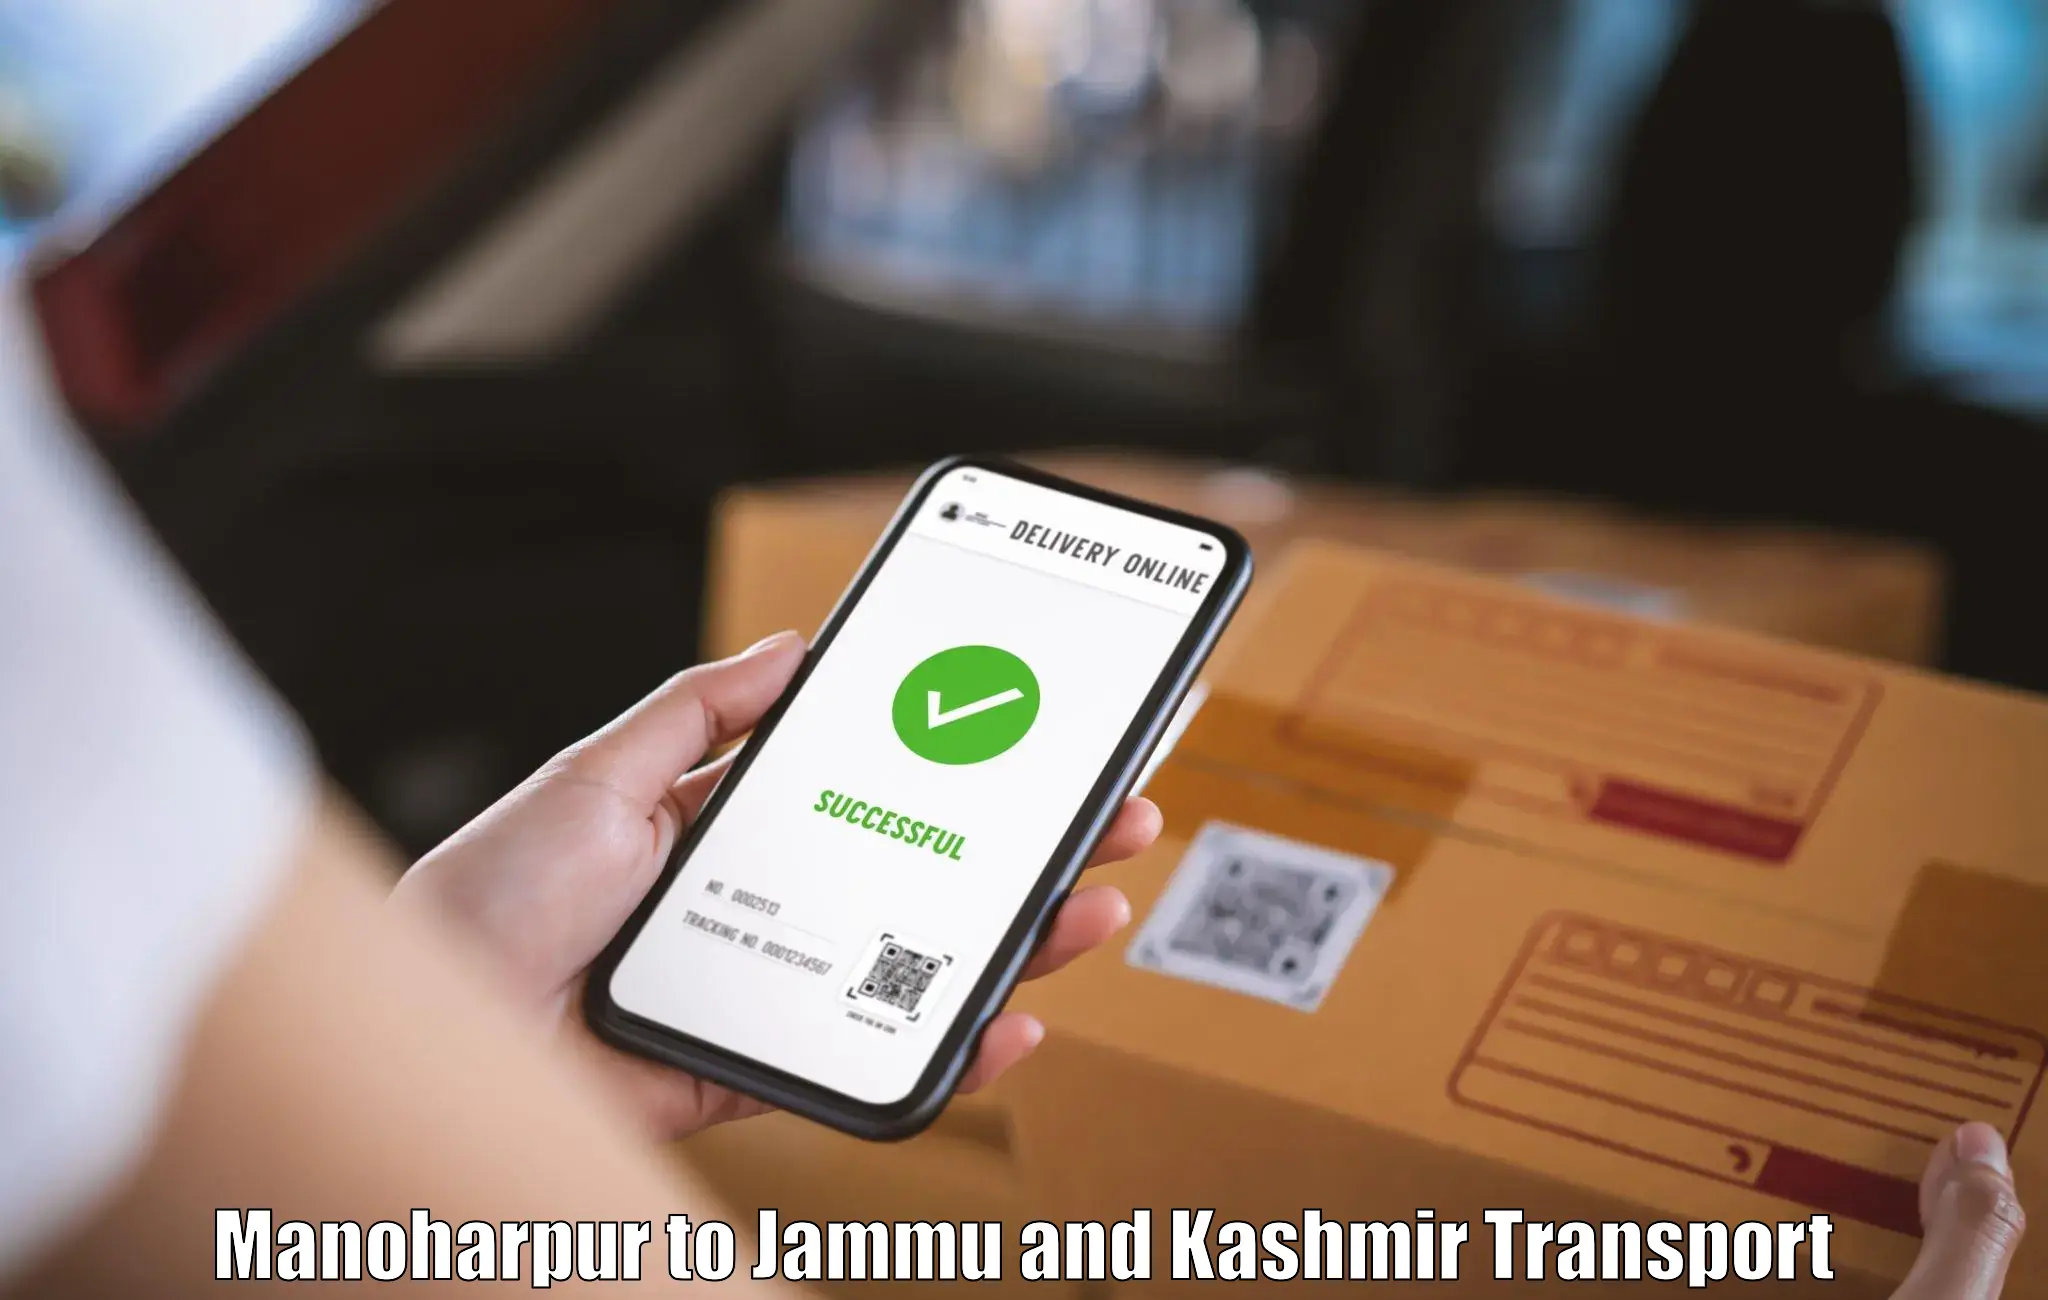 Goods delivery service Manoharpur to Baramulla